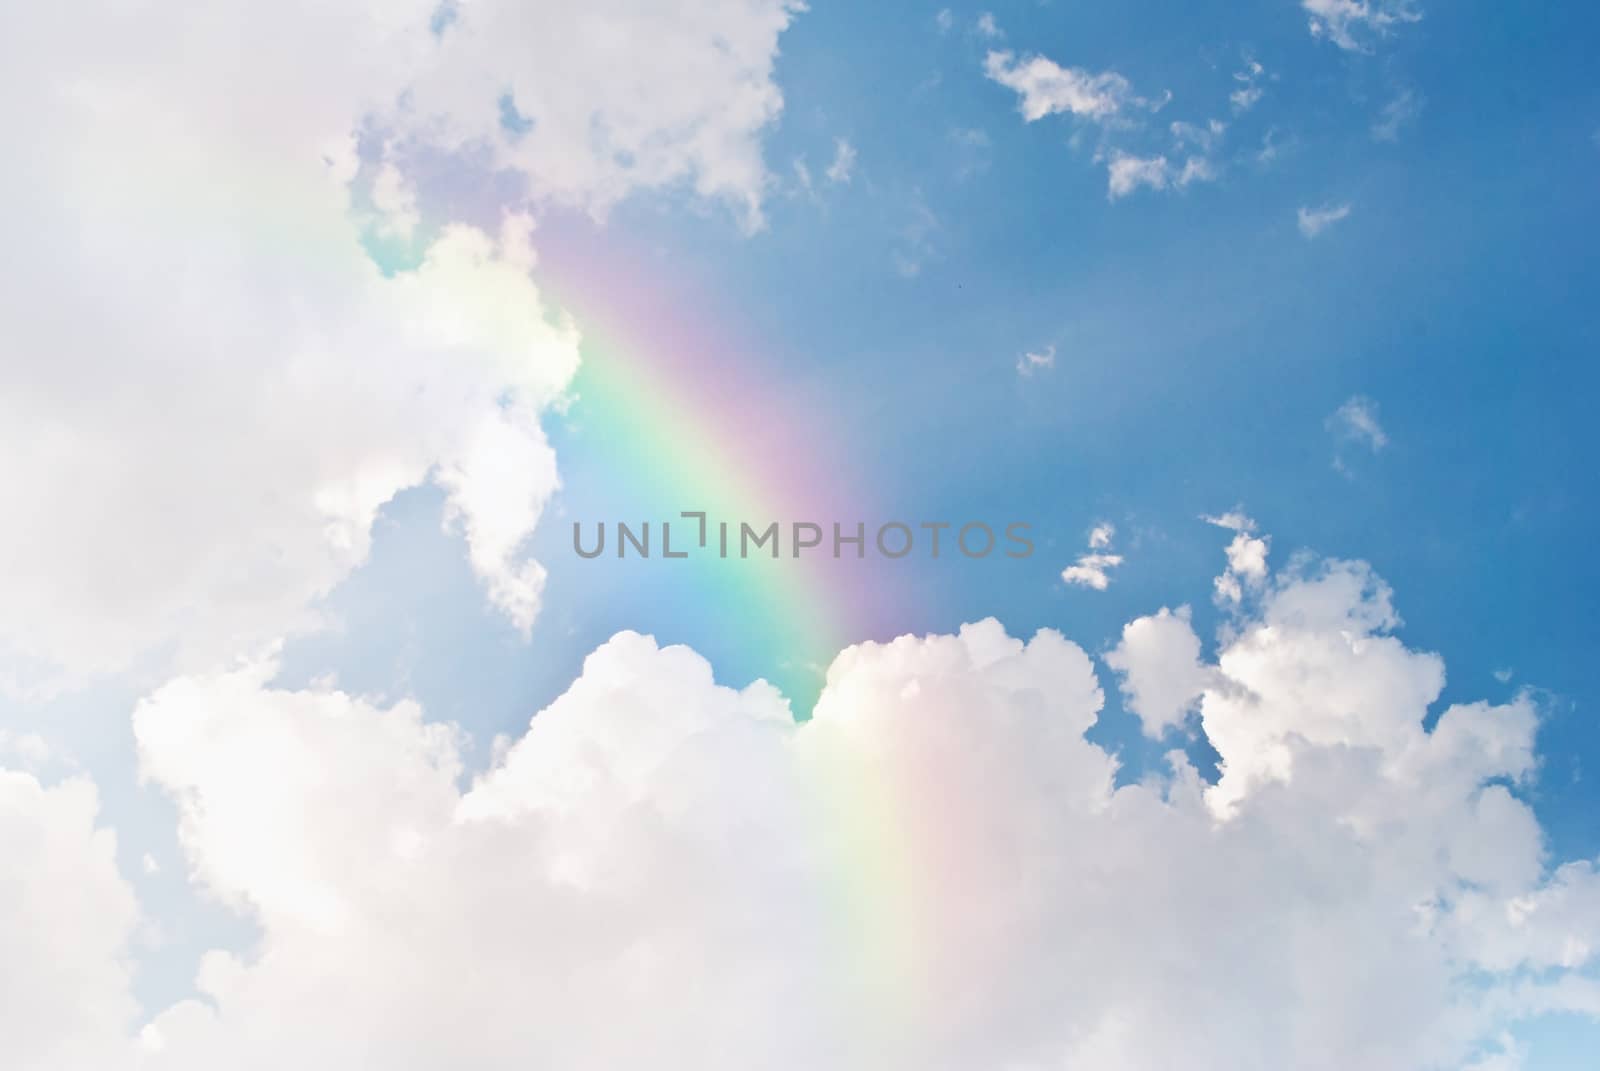 image of blue sky and white clouds with rainbow by rakoptonLPN